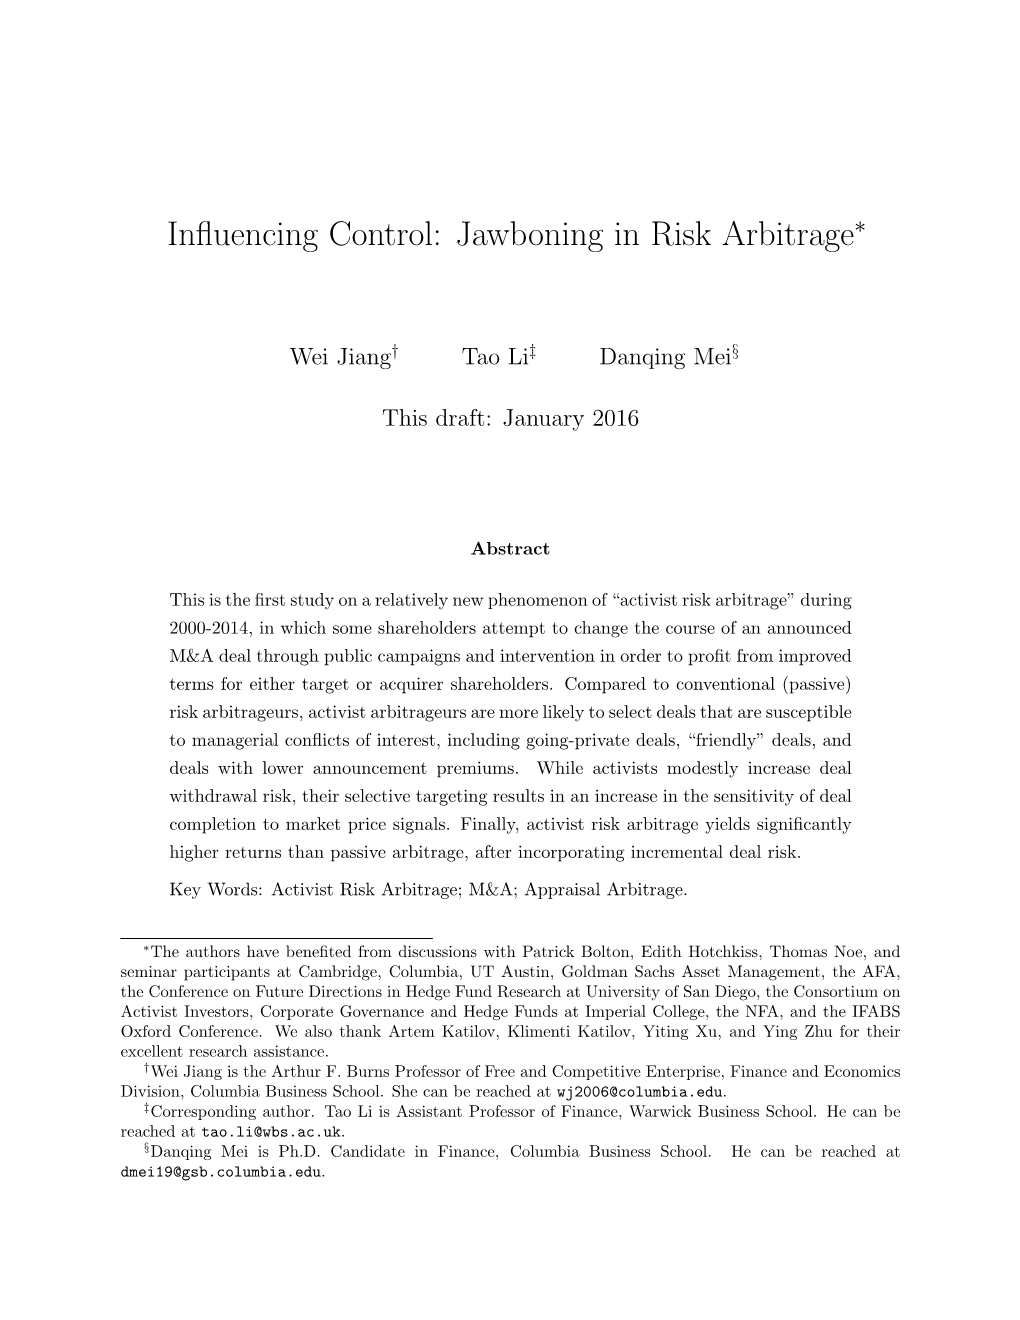 Influencing Control: Jawboning in Risk Arbitrage